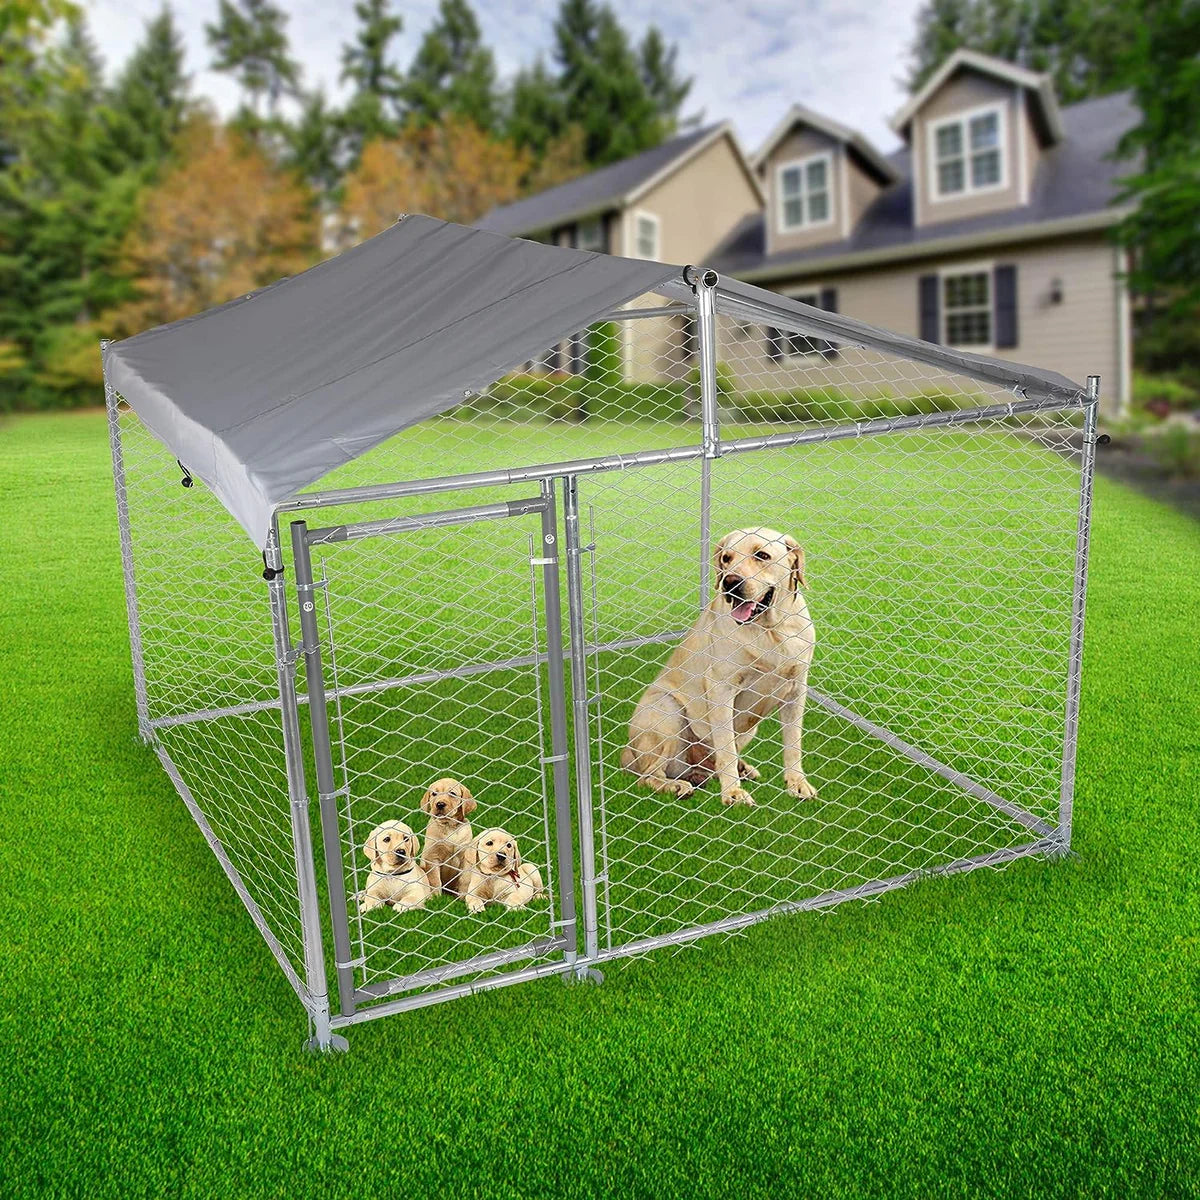 Outdoor Dog Kennel Galvanized Steel Pet Playpen with Waterproof Cover Secure Lock for Large Dog